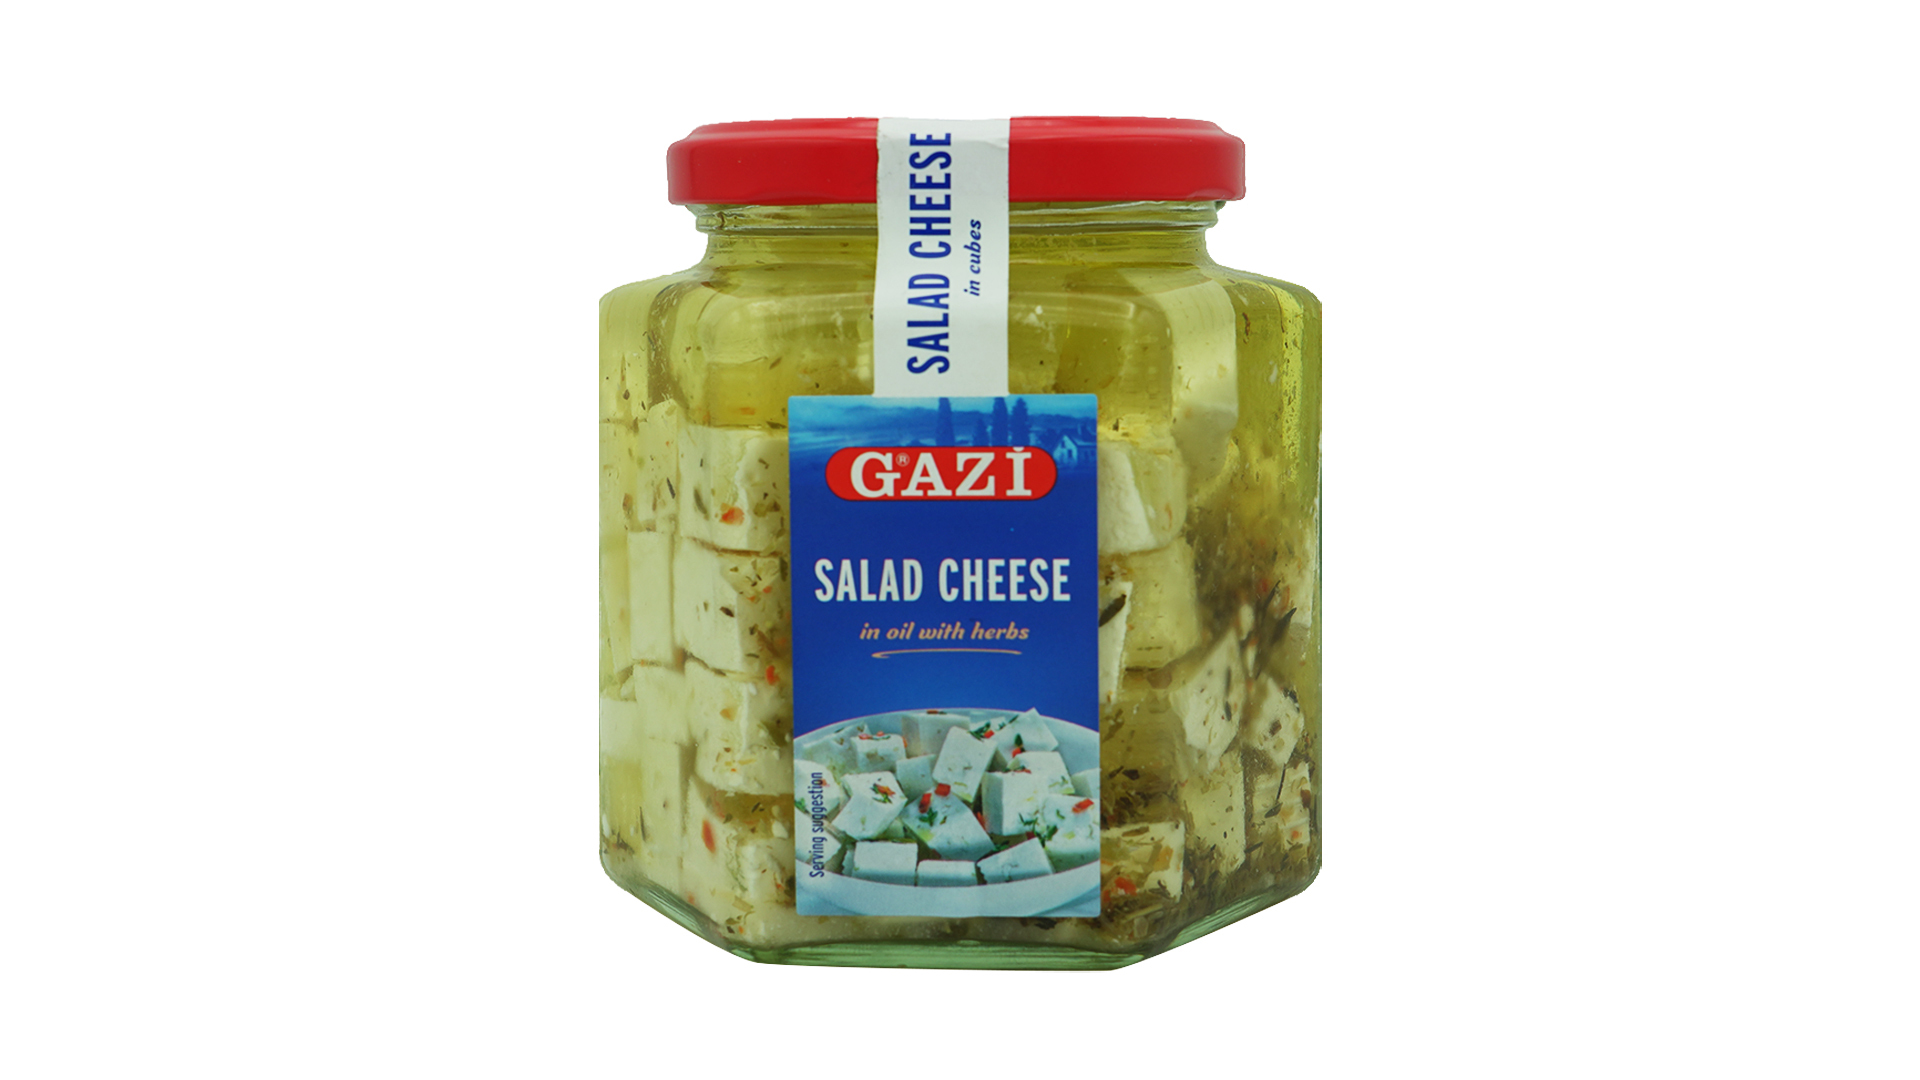 Gazi salad cheese in oil with herbs blue label 375g 1